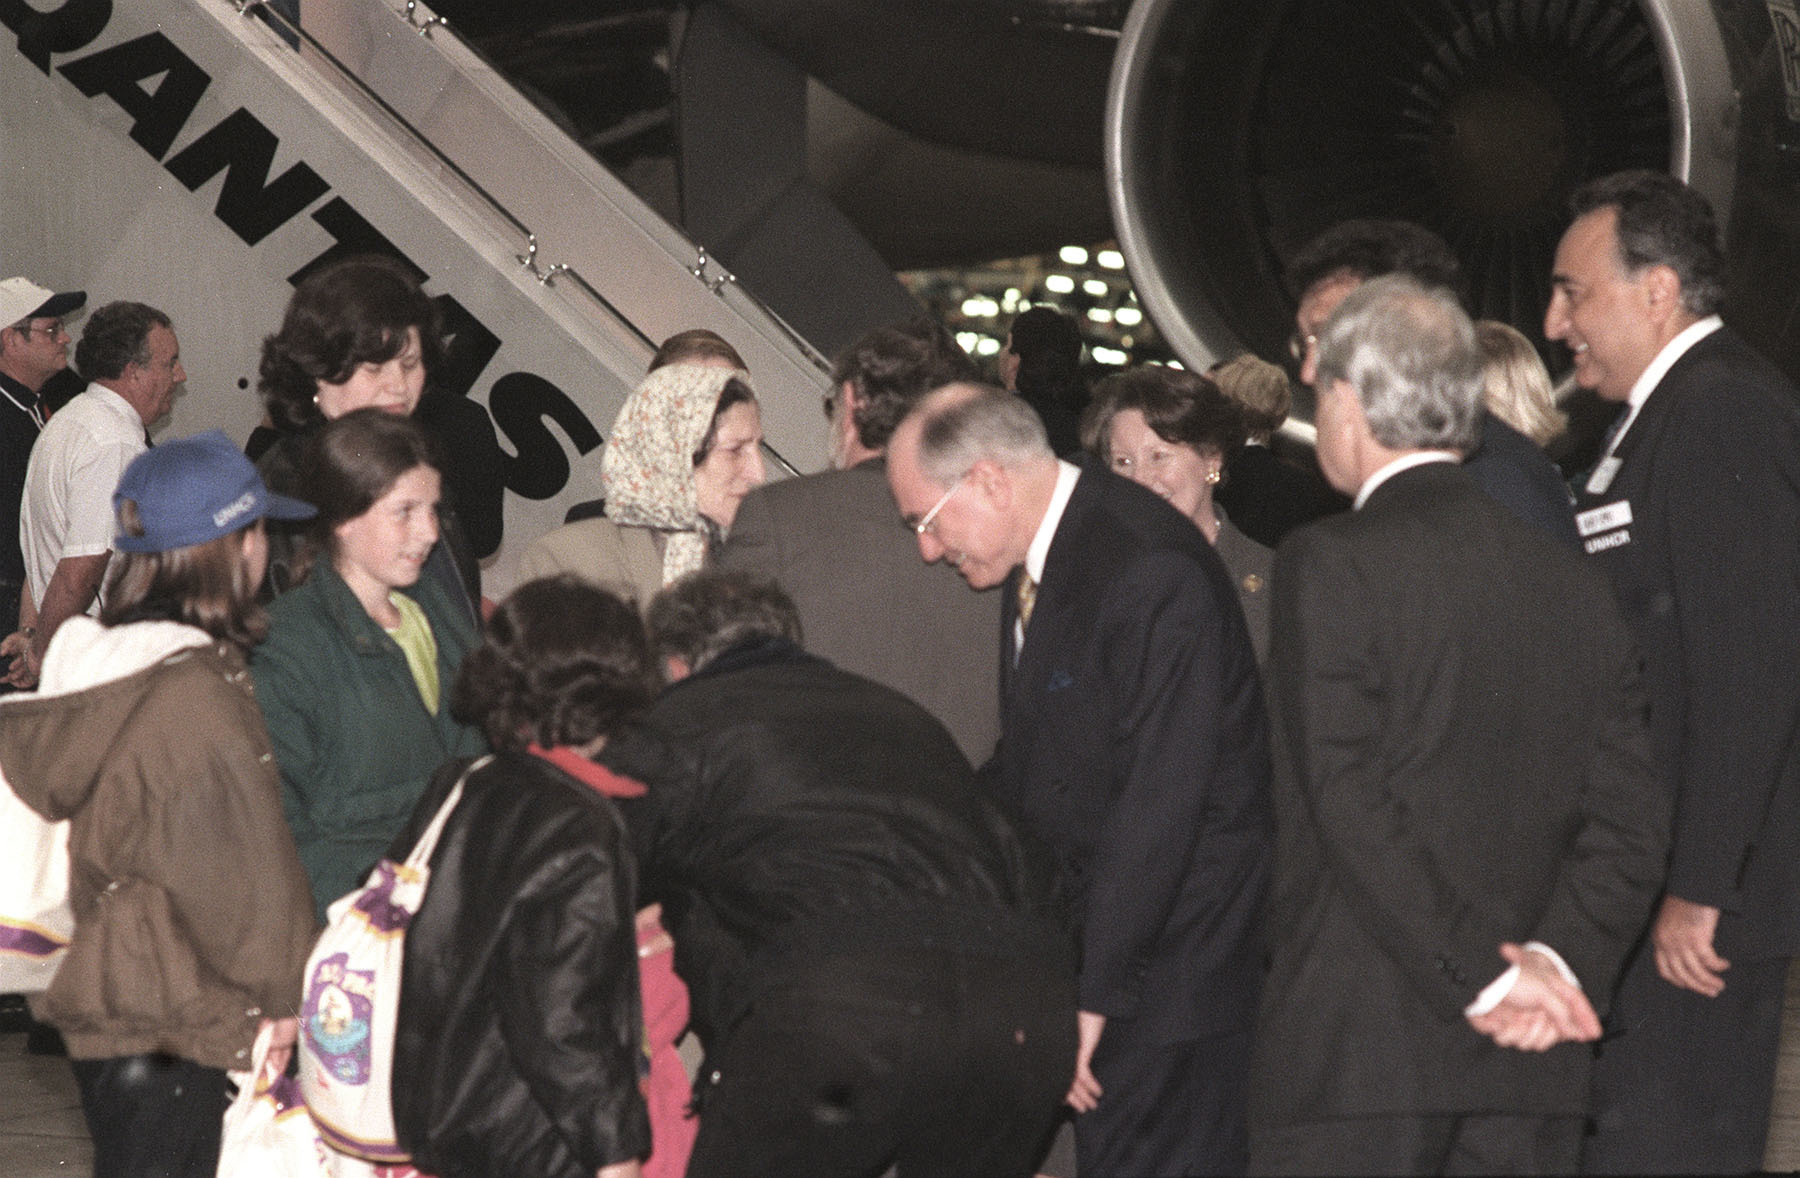 Australian Prime Minister John Howard and Immigration Minister Philip Ruddock greet newly arrived Kosovo refugees at Sydney airport in 1999.